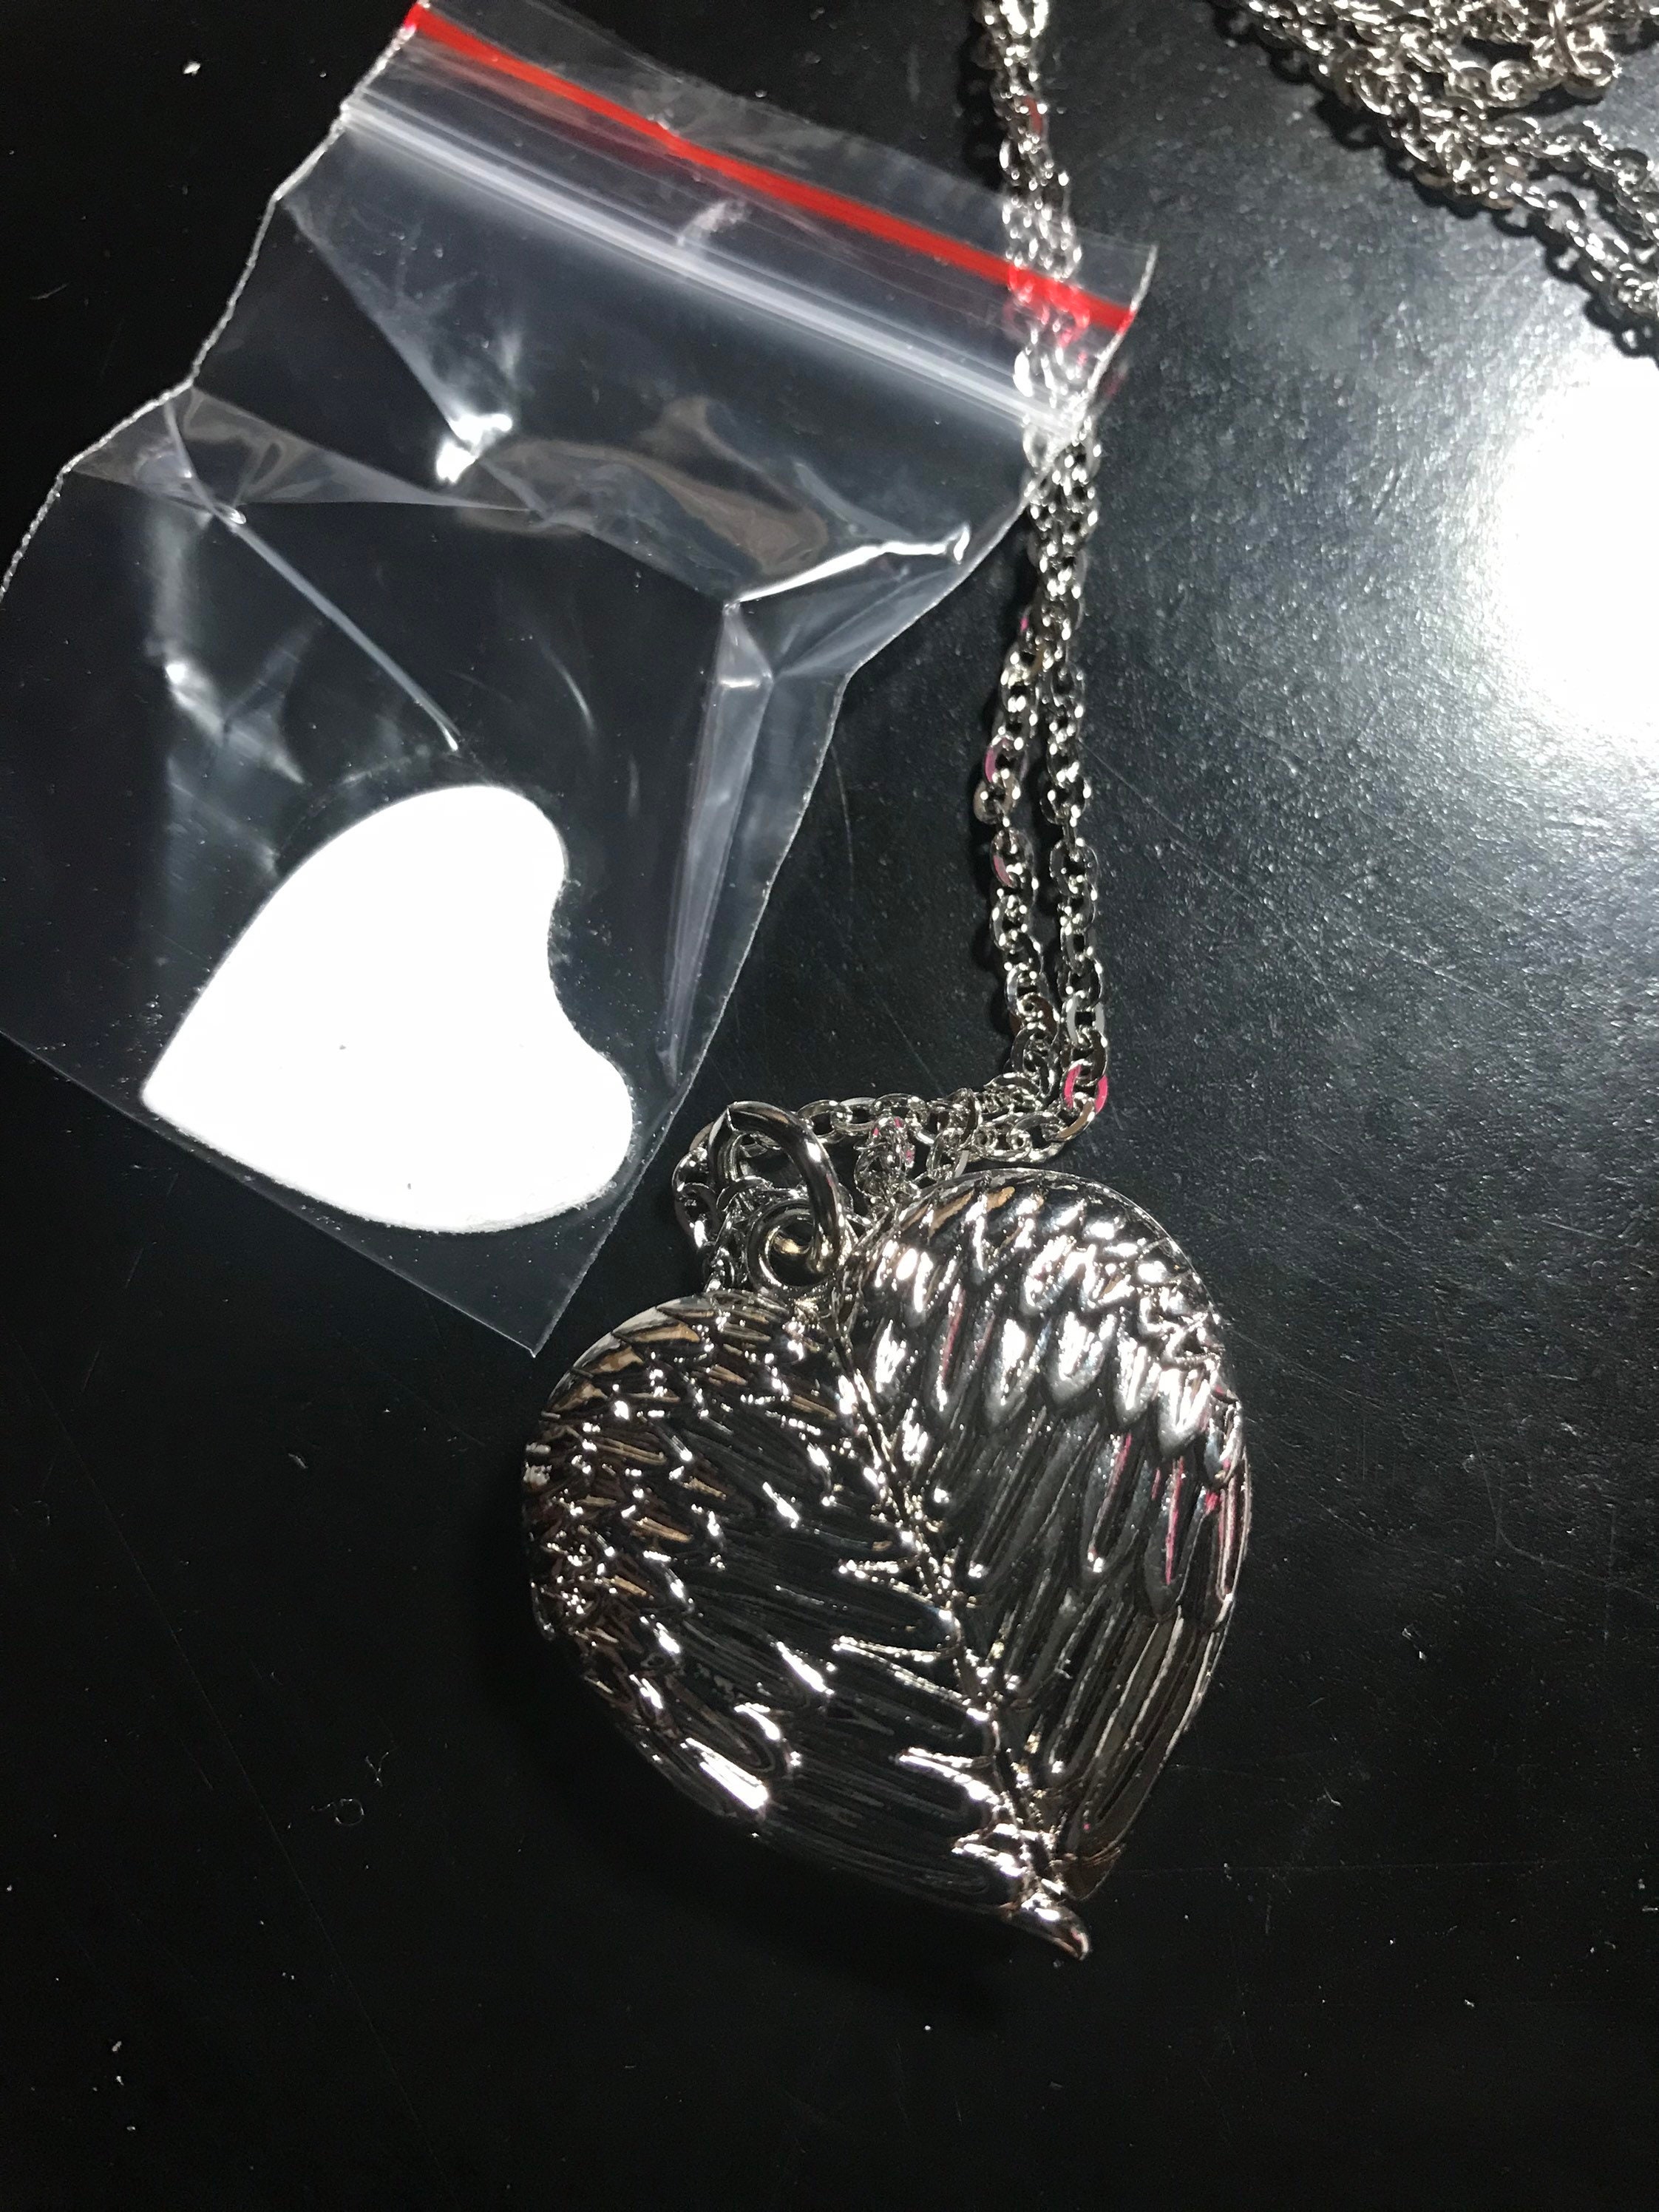 Angel Winged Sublimation Necklace (SILVER Only) – Krafters Kingdom